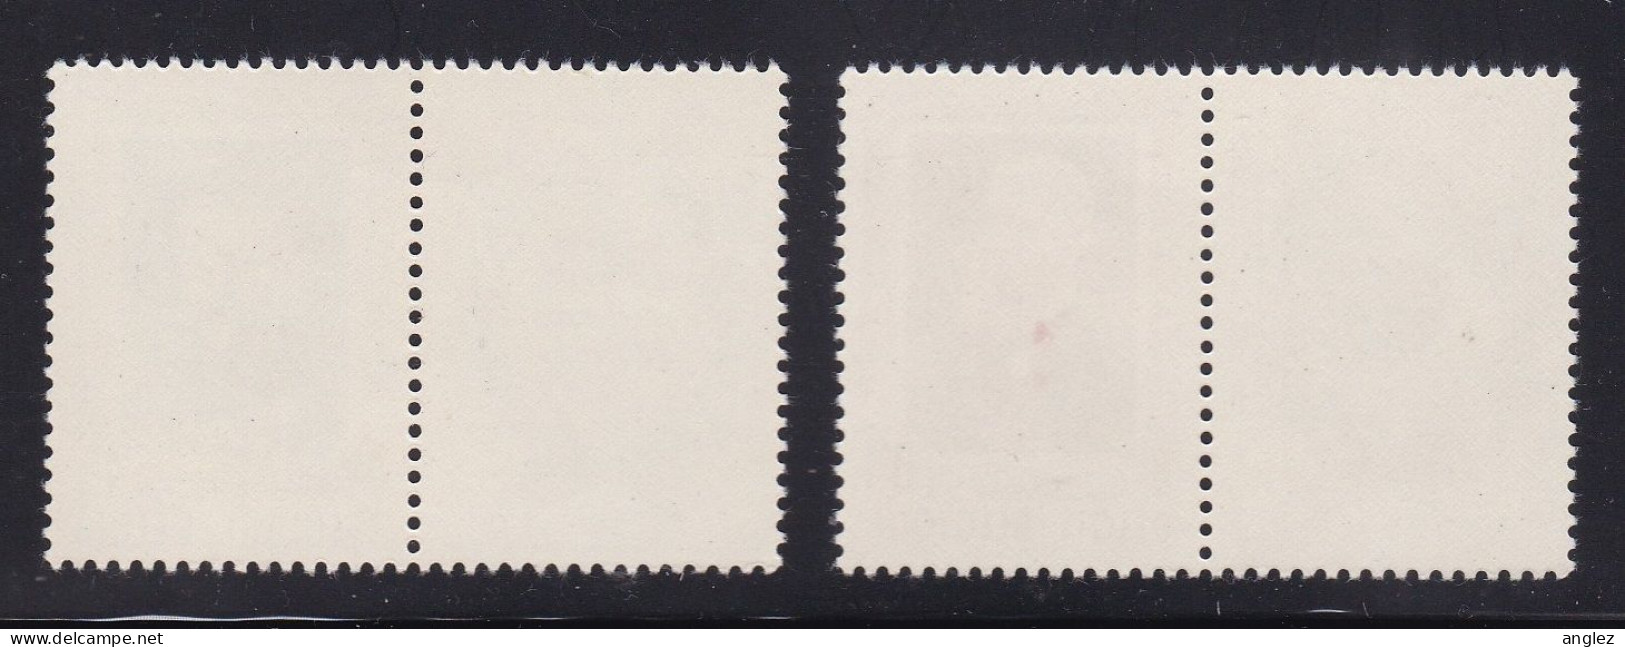 Belgium - 1952 Authors / Writers Subscription Issue 2v With Labels MNH - Nuovi